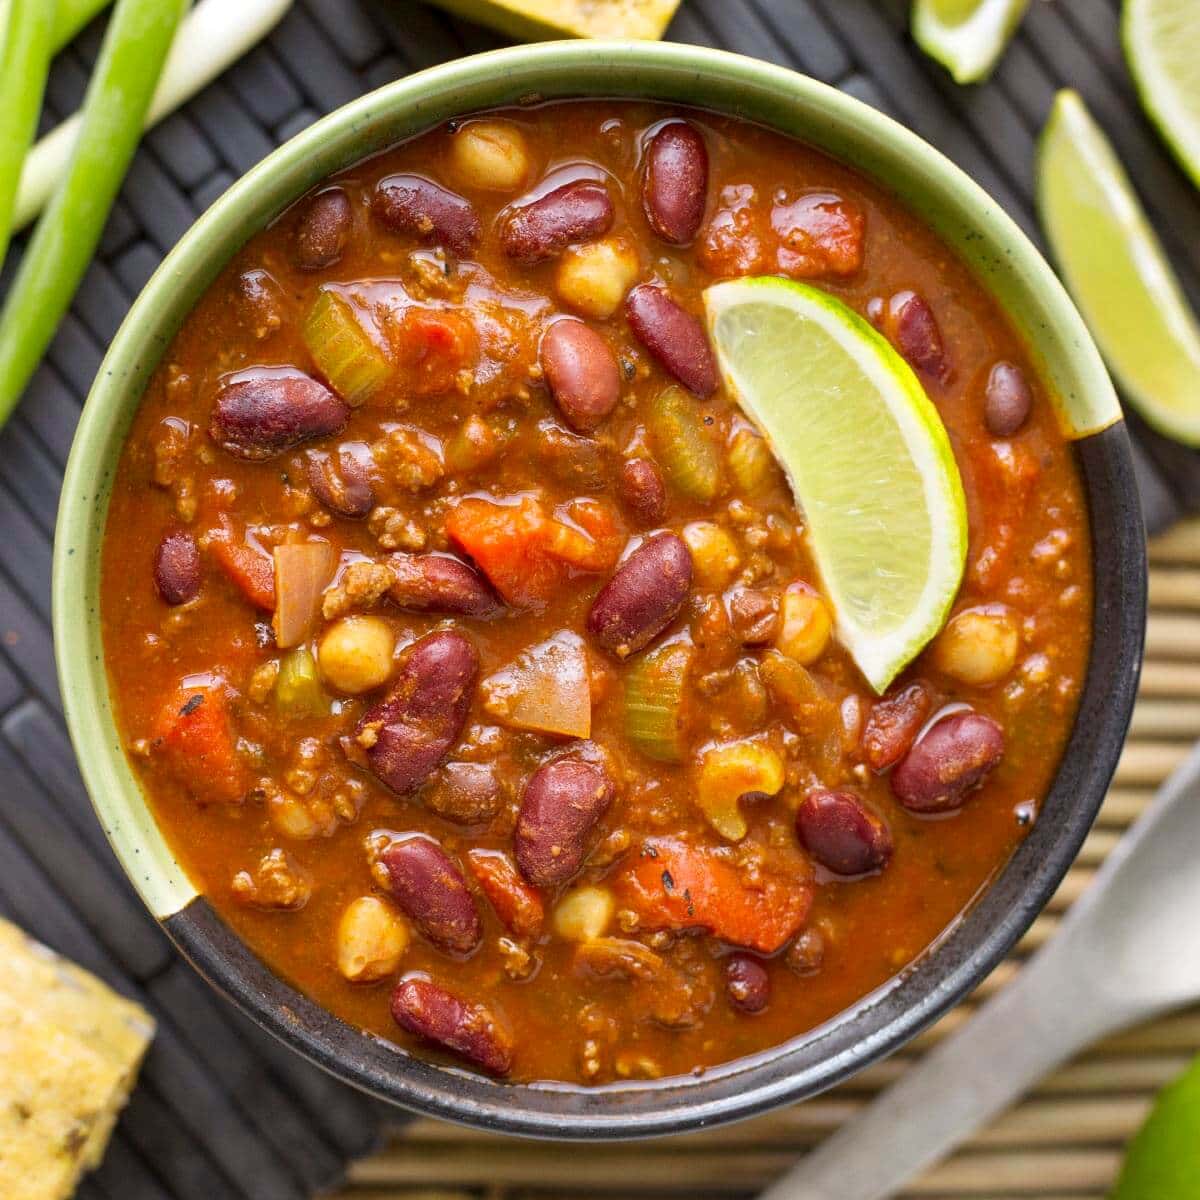 https://www.simplyhappyfoodie.com/wp-content/uploads/2022/01/Instant-pot-chili-featured.jpg